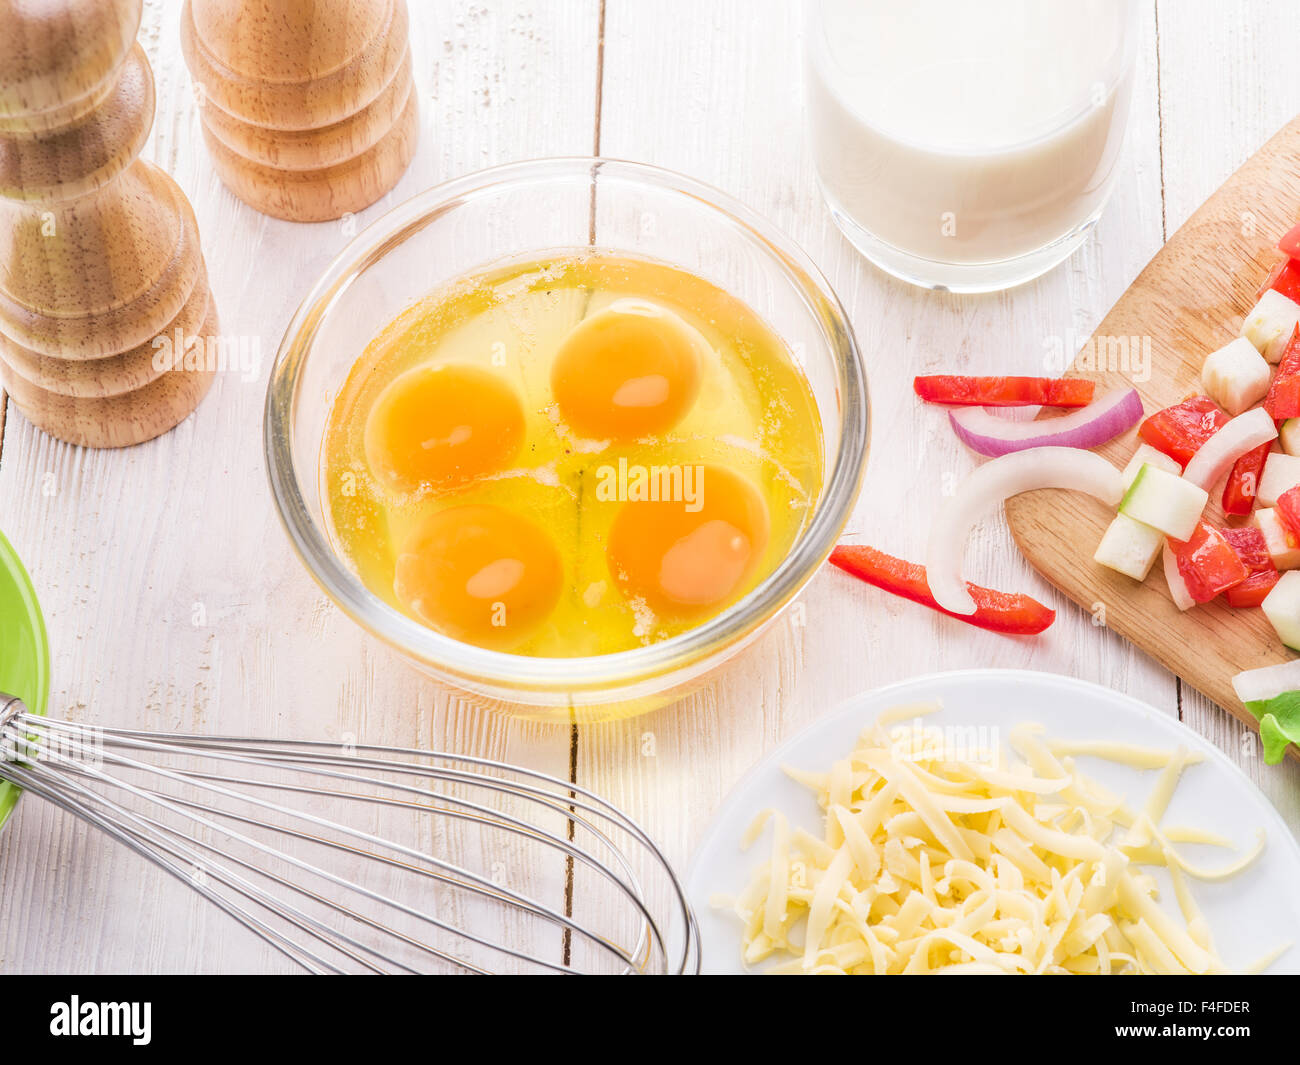 Omelet ingredients: eggs, fresh cut vegetables, milk and cheese on the wooden table. Stock Photo